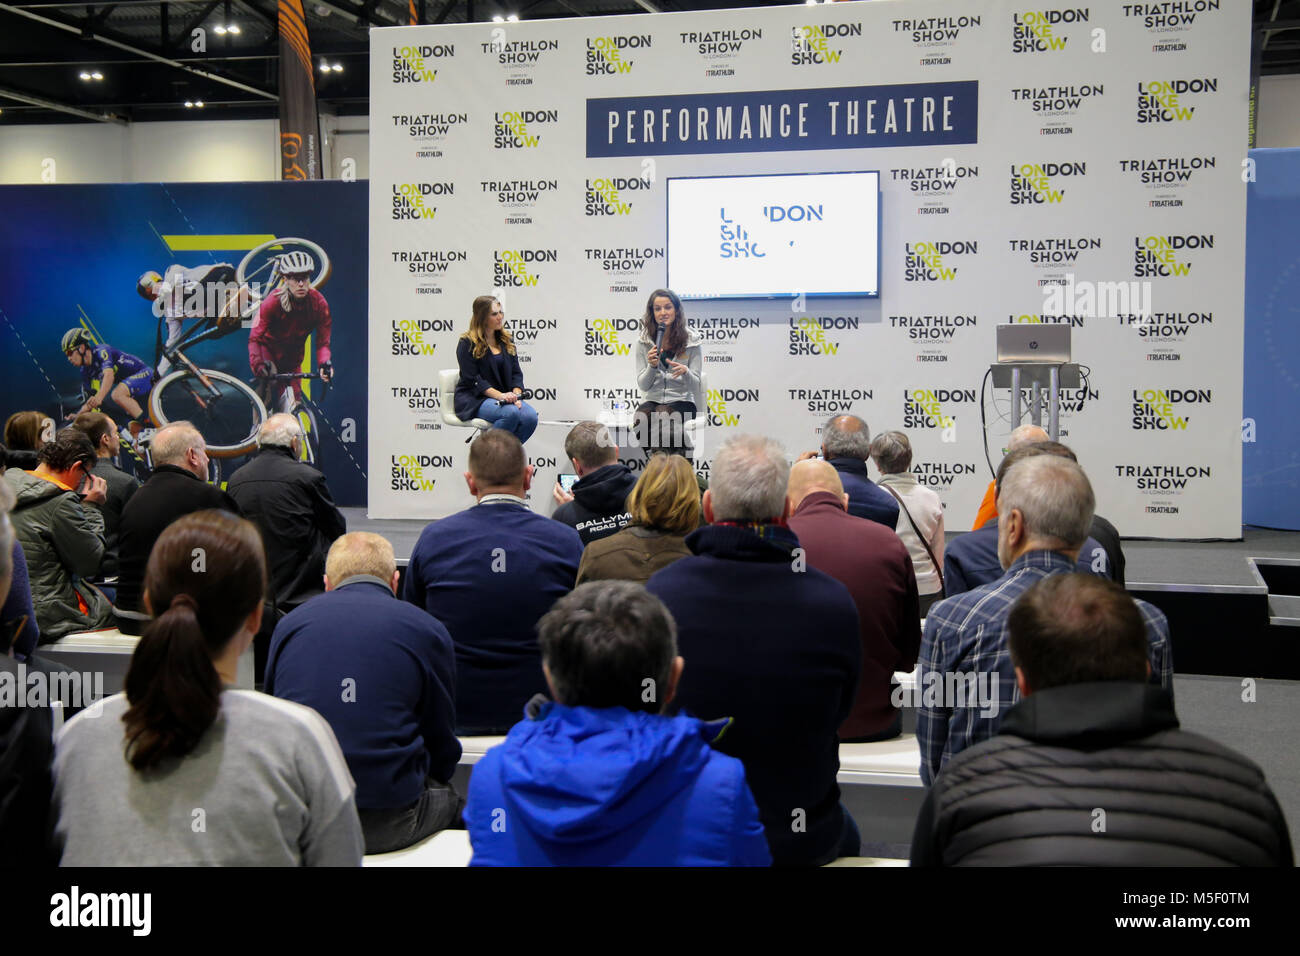 London UK  23 February 2018 Lizzie Deignan in the stage of the London Bike Show 2018, Lizzie established herself as the dominant rider on the international women’s road racing scene,winning  the 2014 and 2015 UCI Women’s World Cup series and  winning the 2015 road race World Championship in Richmond, USA and the Tour of Flanders in 2016.The Yorkshire lass  also had the honor of being the first British athlete to win a medal ,silver, at the London Olympics in 2012 @Paul Quezada-Neiman/Alamy Live News Stock Photo